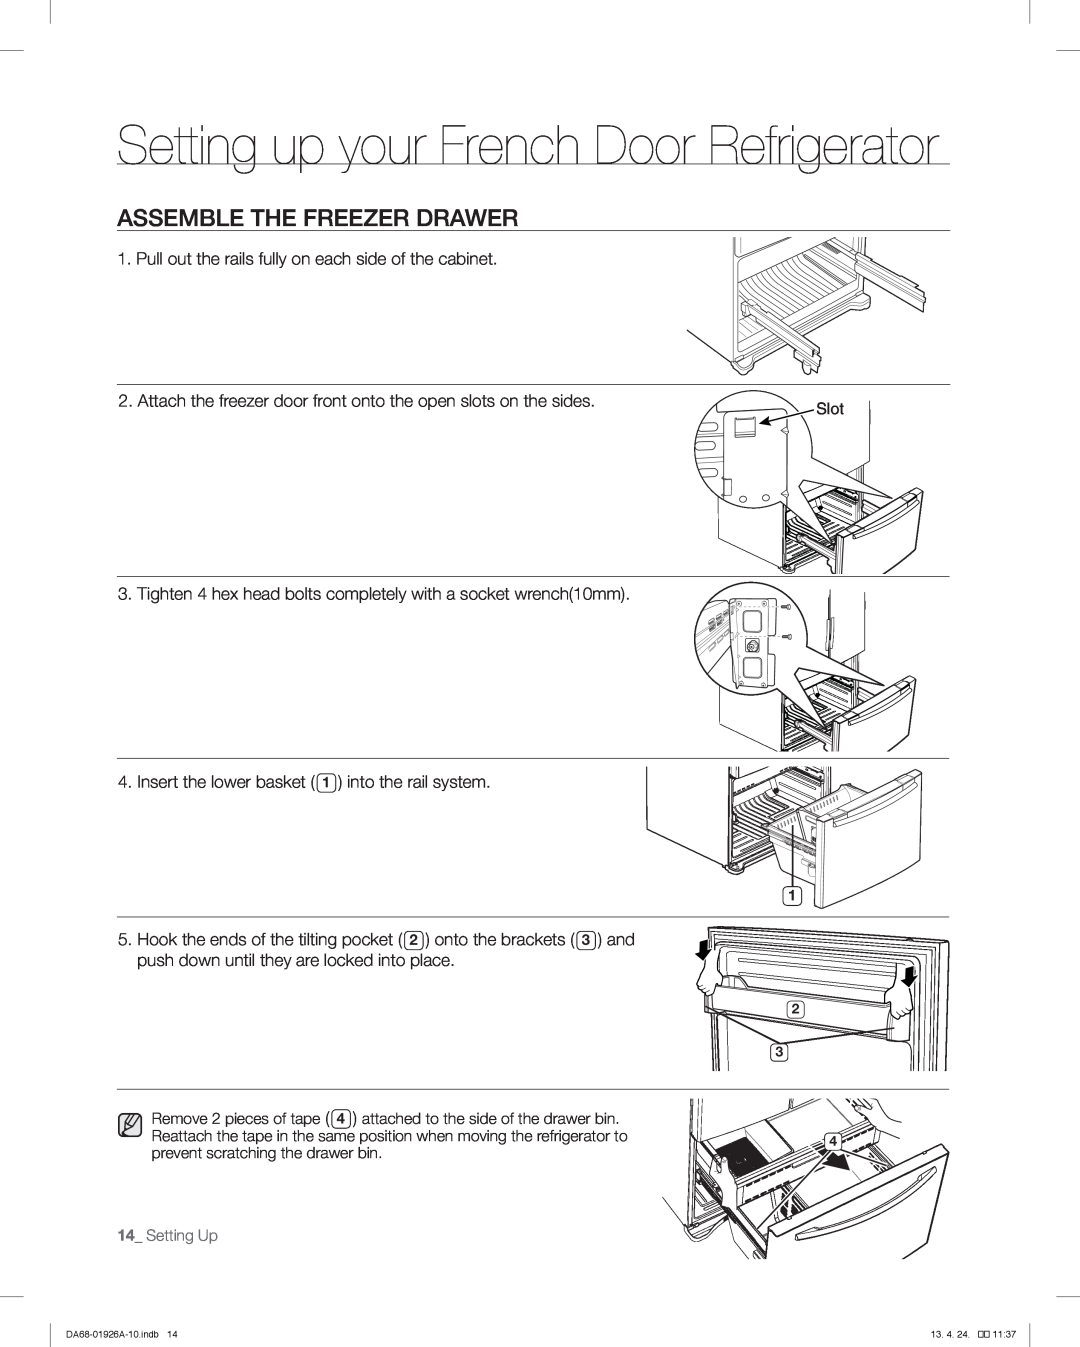 Samsung RFG293HARS, RFG293HAWP user manual Assemble The Freezer Drawer, Setting up your French Door Refrigerator 